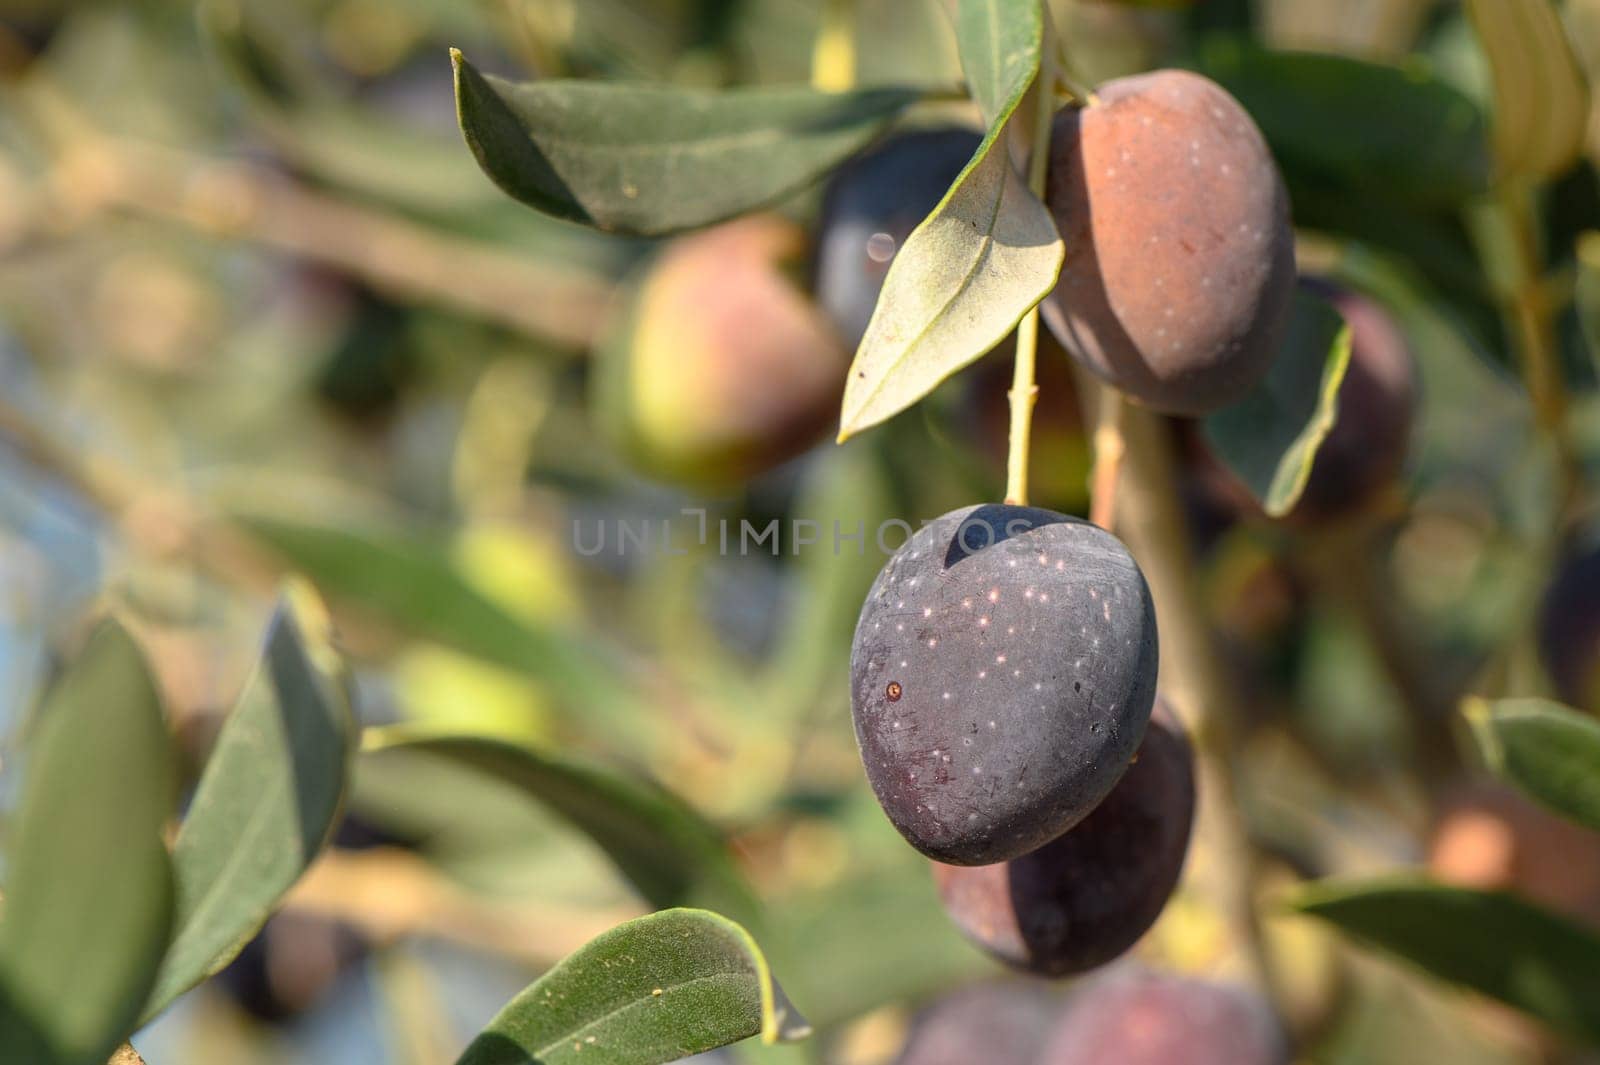 olives on the island of Cyprus 1 by Mixa74